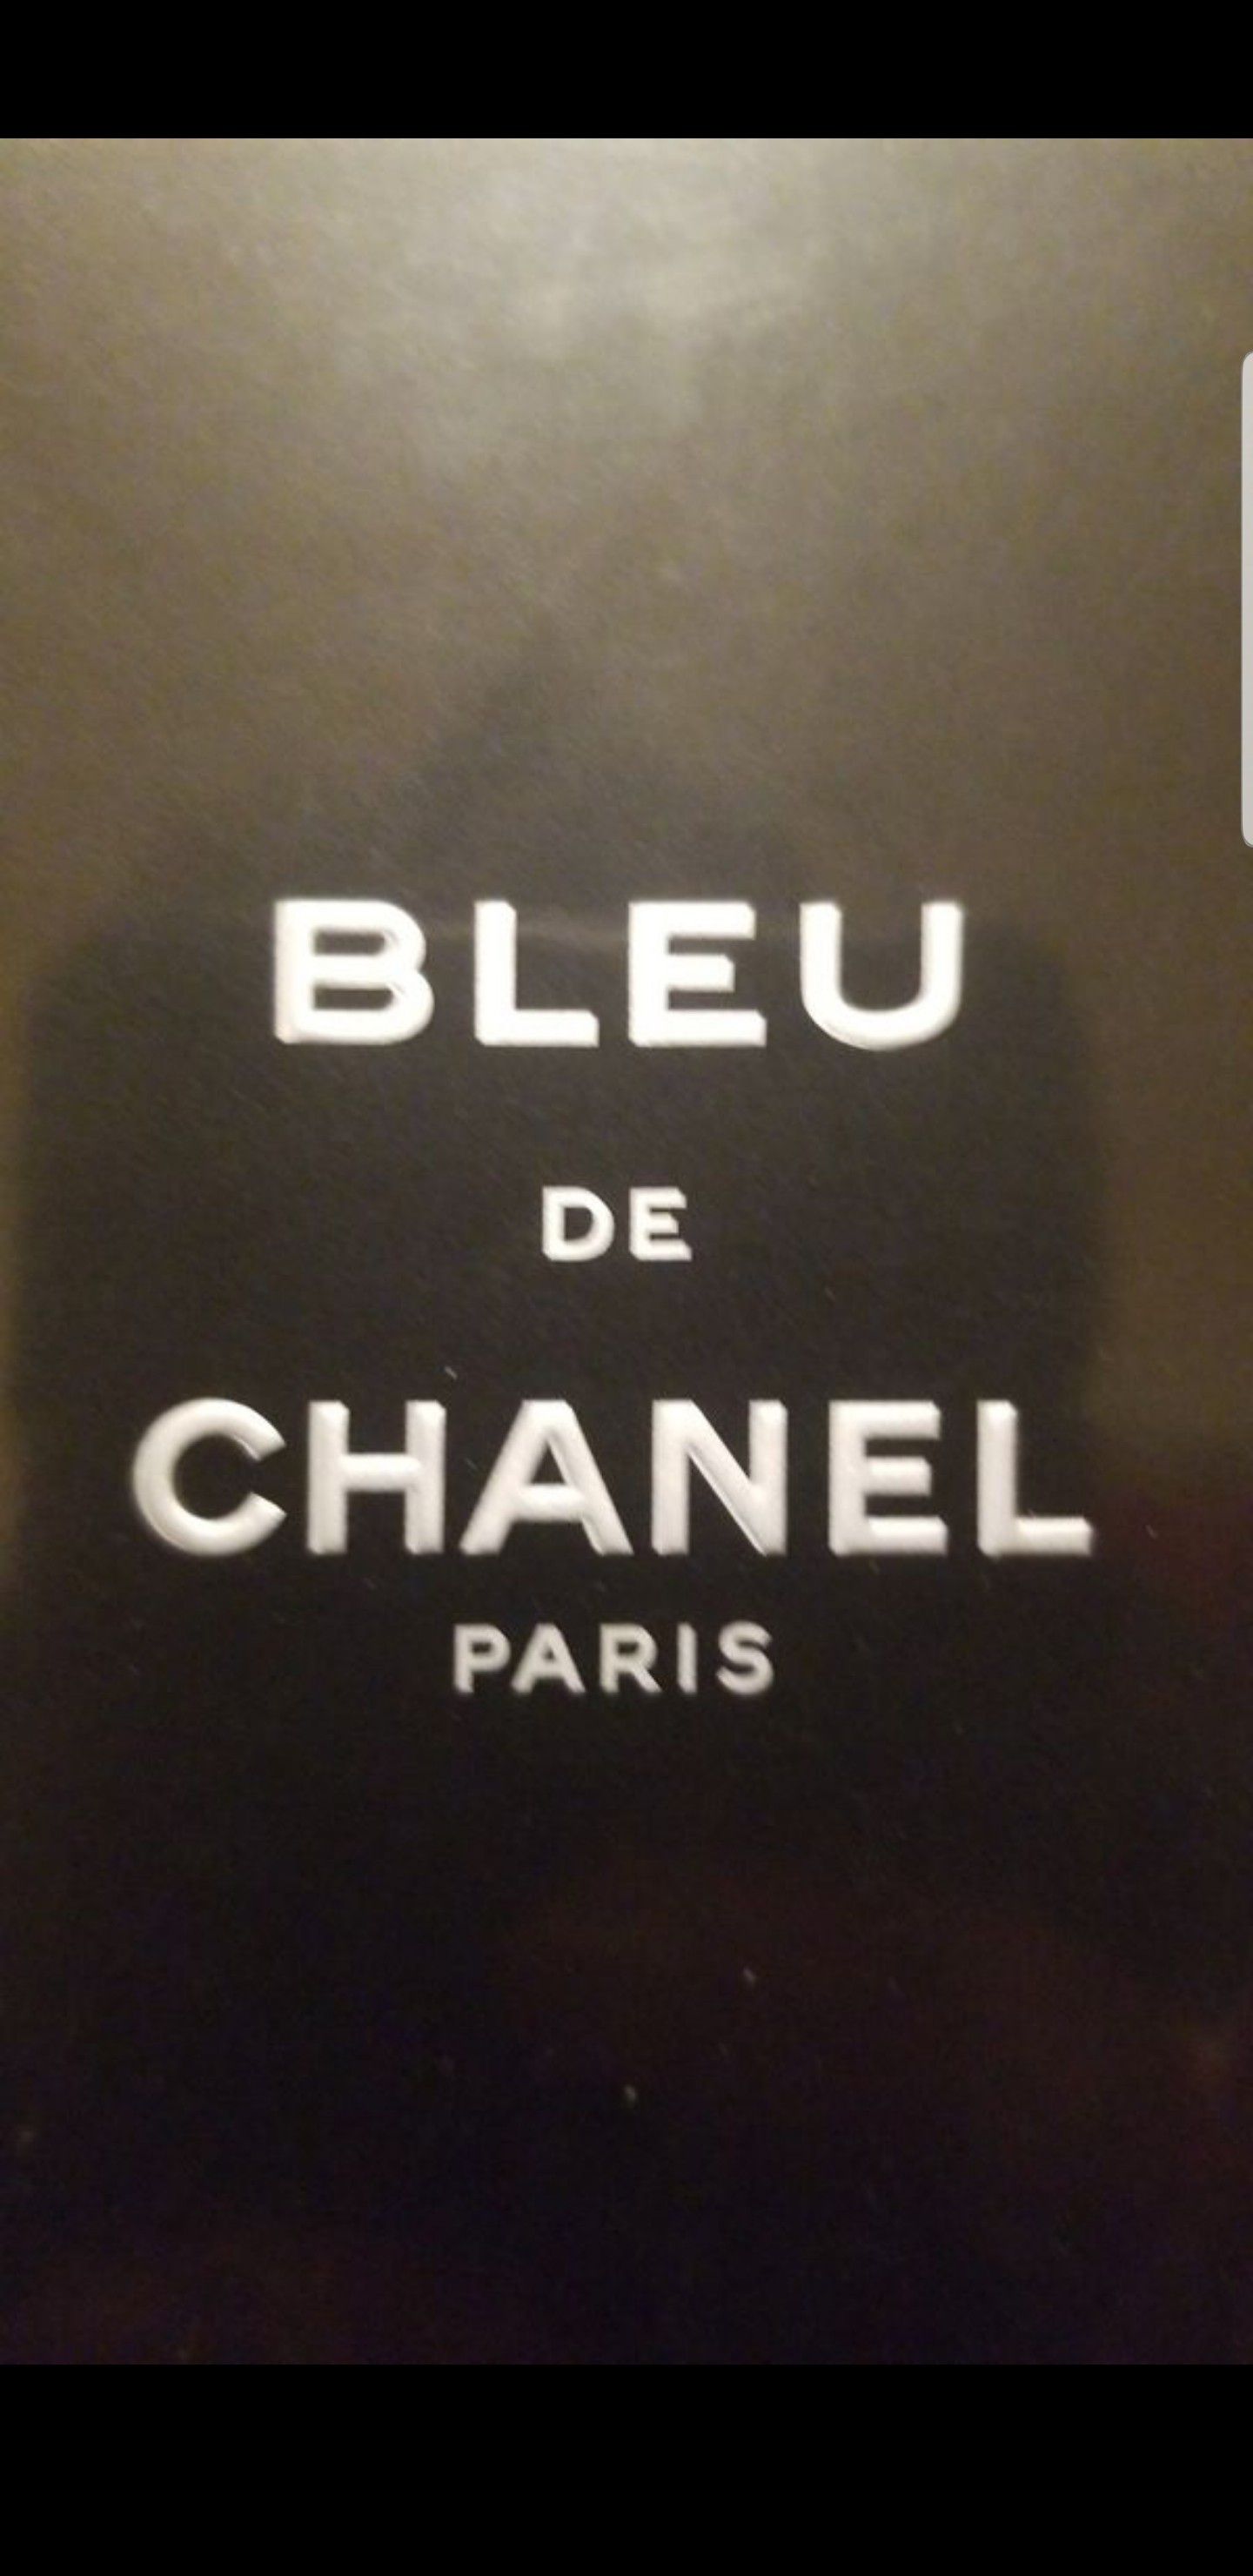 Chanel, Bleu de Chanel. Perfume for Man. 100ml. (Large, New & sealed in box.) Display.